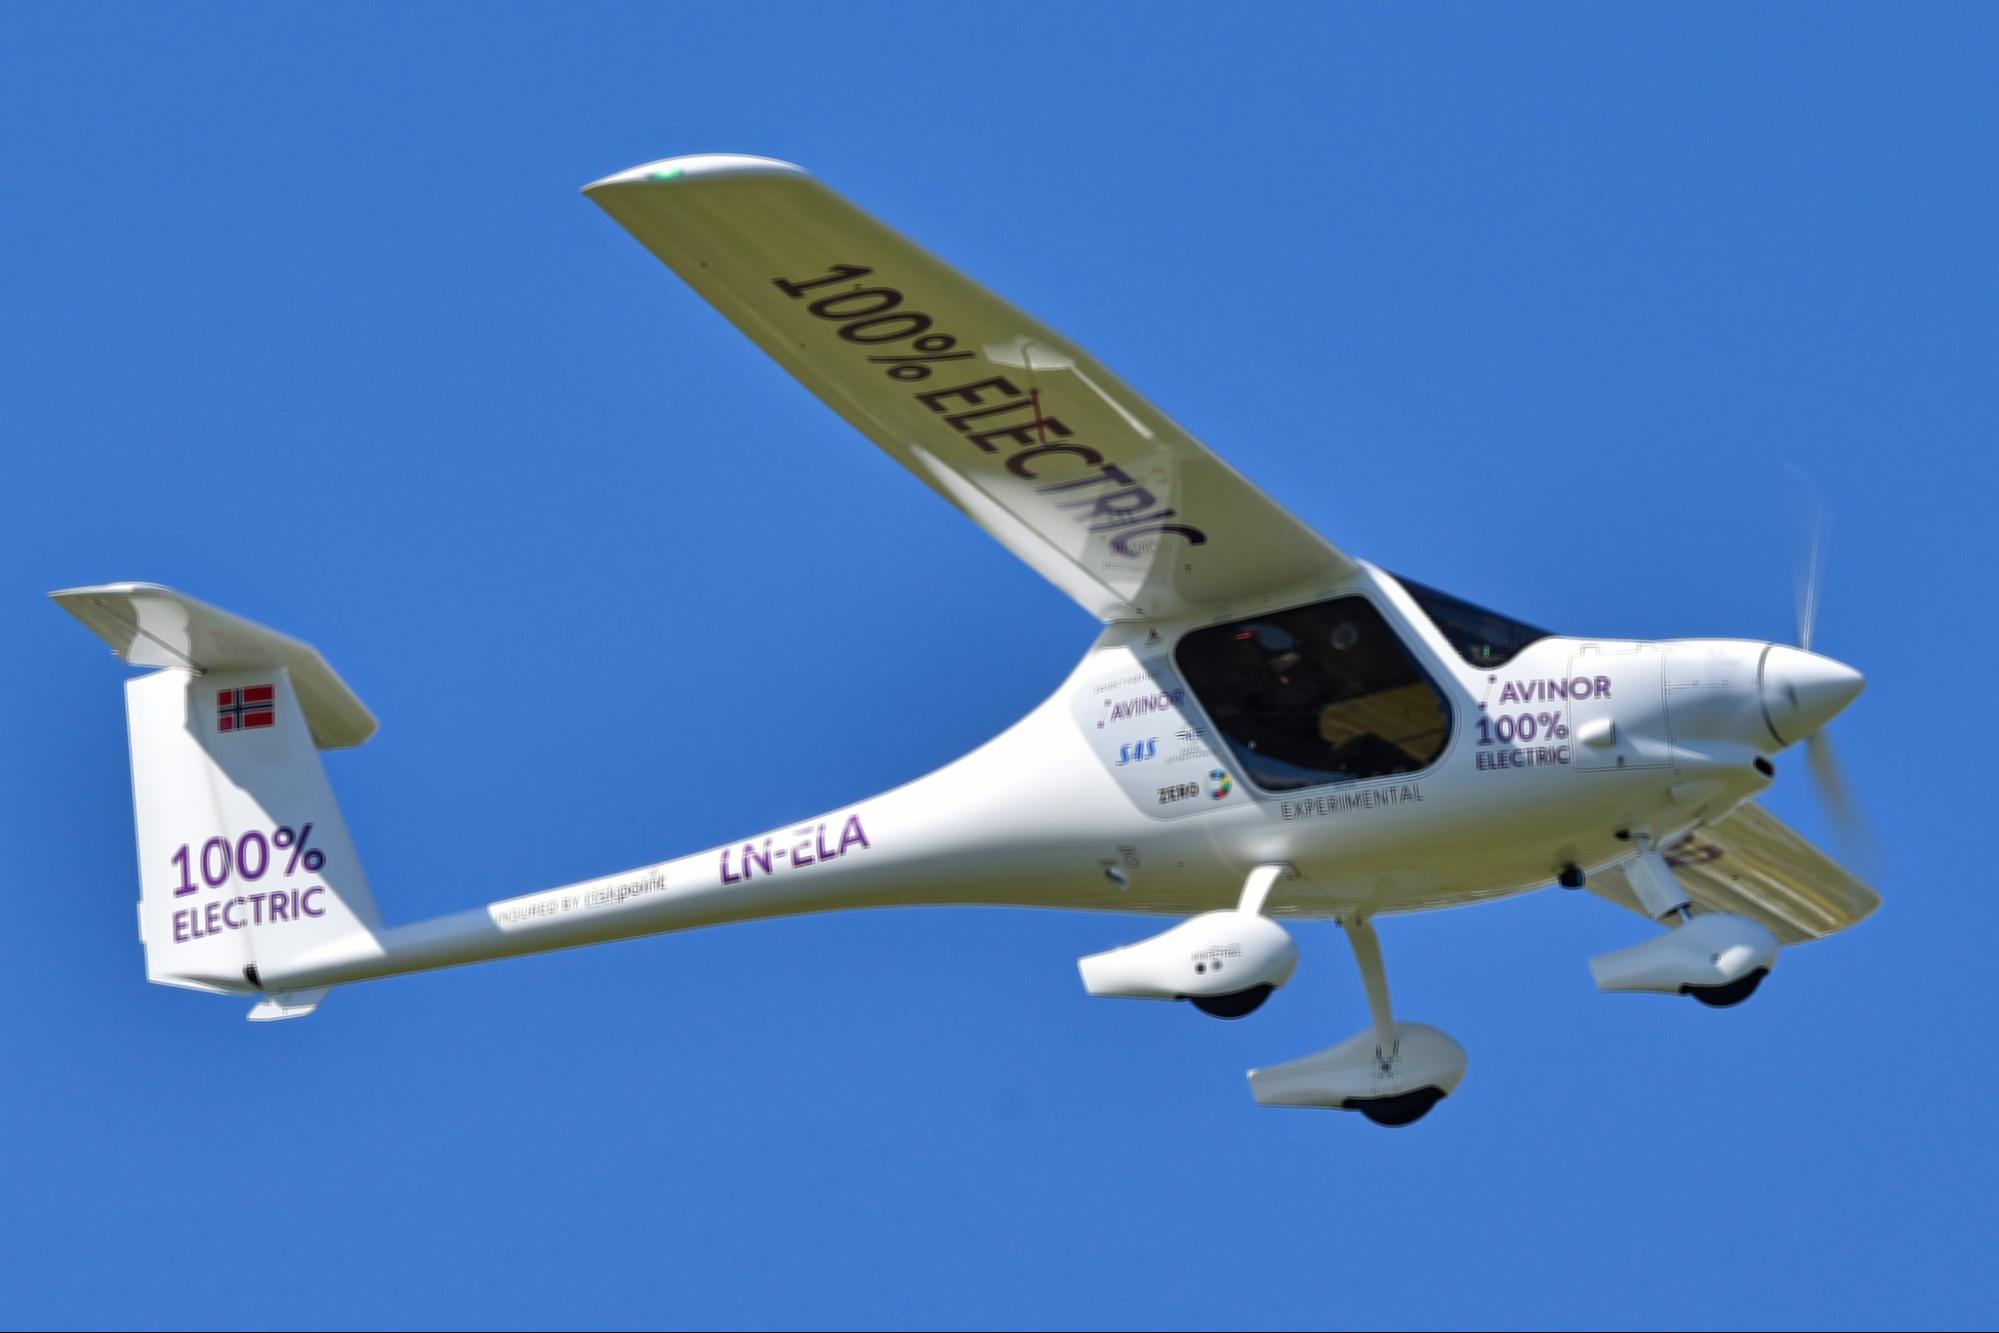 Electric Plane Flight in New Zealand Sets Record During Pivotal Climate Summit